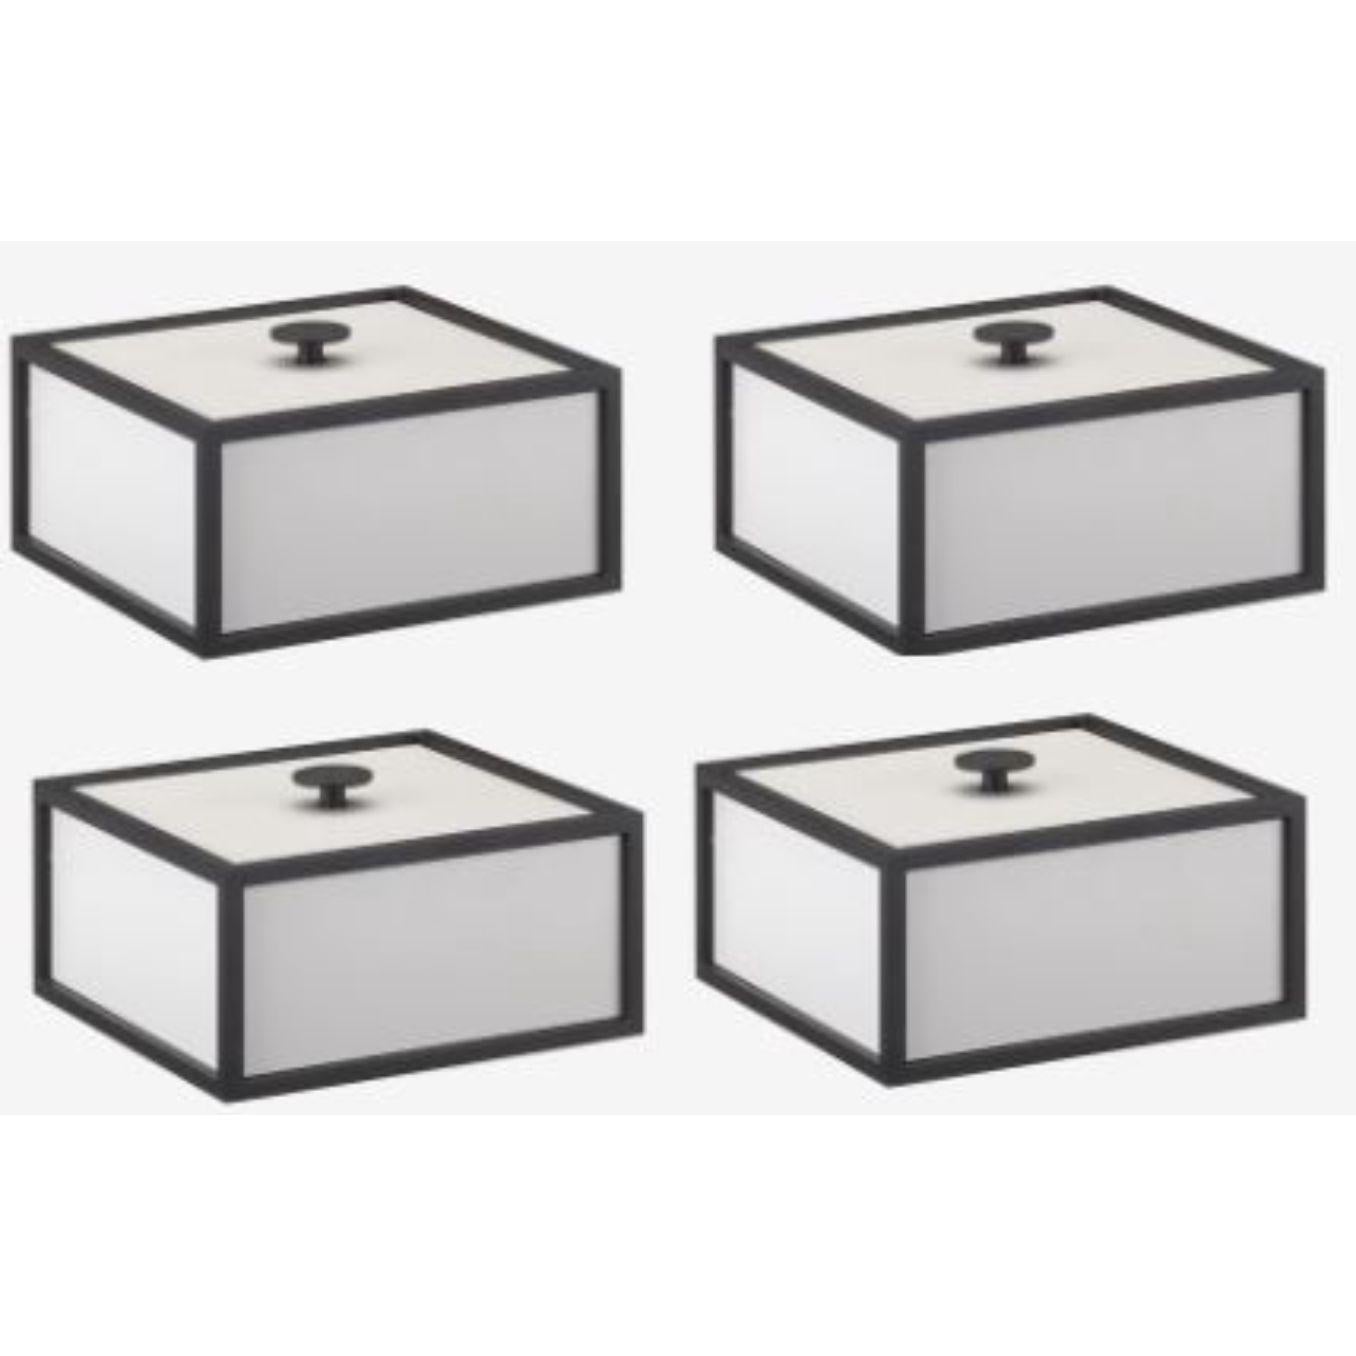 Set of 4 light grey frame 14 box by Lassen
Dimensions: d 10 x w 10 x h 7 cm 
Materials: Finér, Melamin, Melamine, Metal, Veneer
Weight: 1.10 Kg

Frame box is a square box in a cubistic shape. The simple boxes are inspired by the Kubus